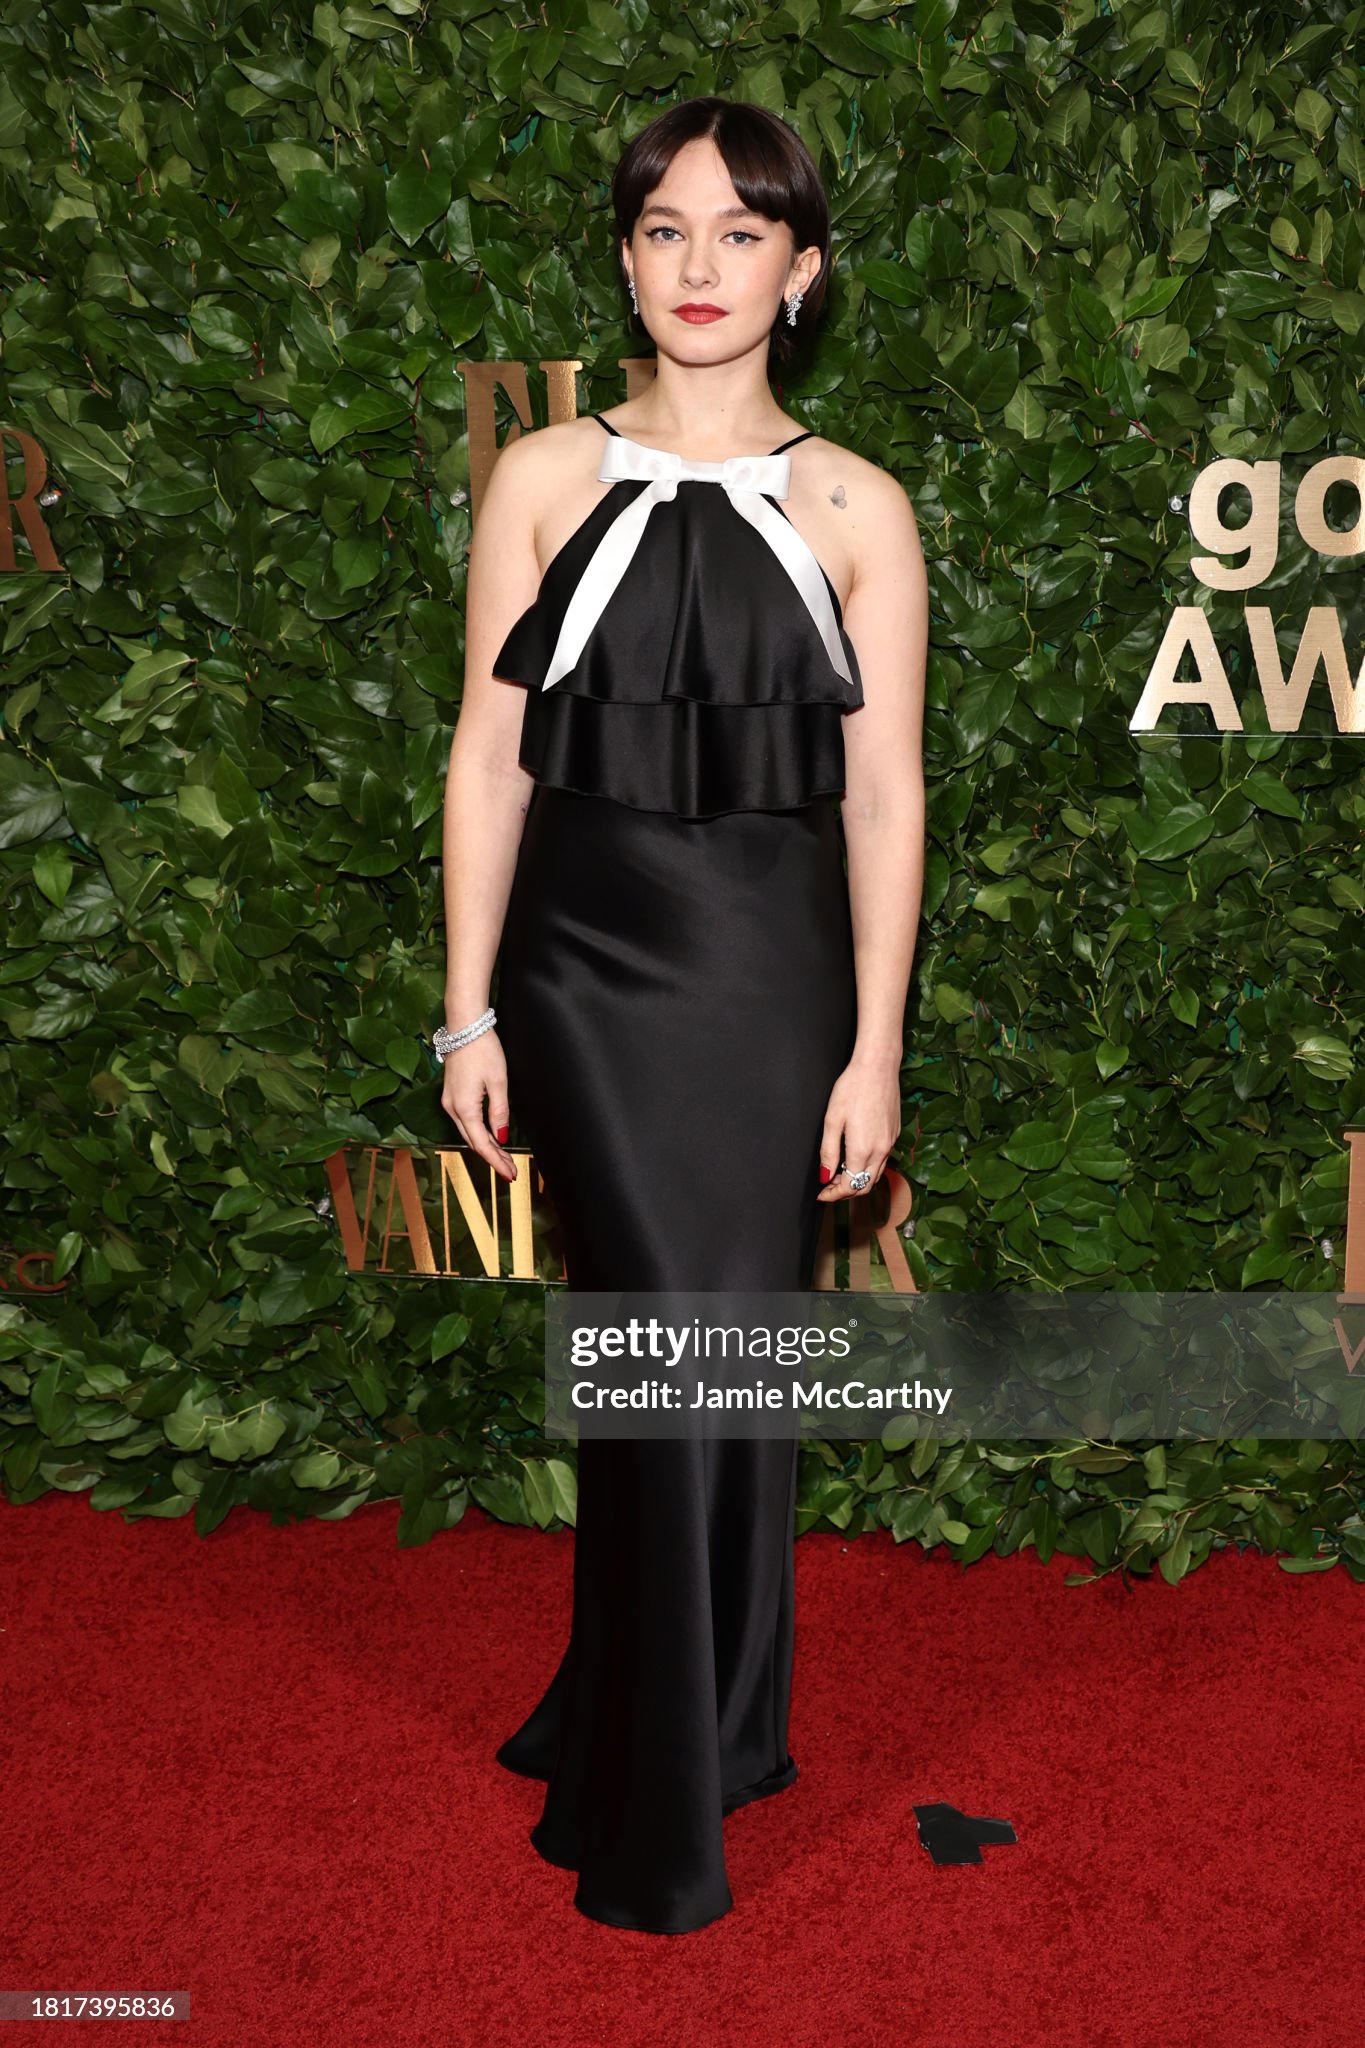 ¿Cuánto mide Cailee Spaeny? - Altura - Real height New-york-new-york-cailee-spaeny-attends-the-33rd-annual-gotham-awards-at-cipriani-wall-street